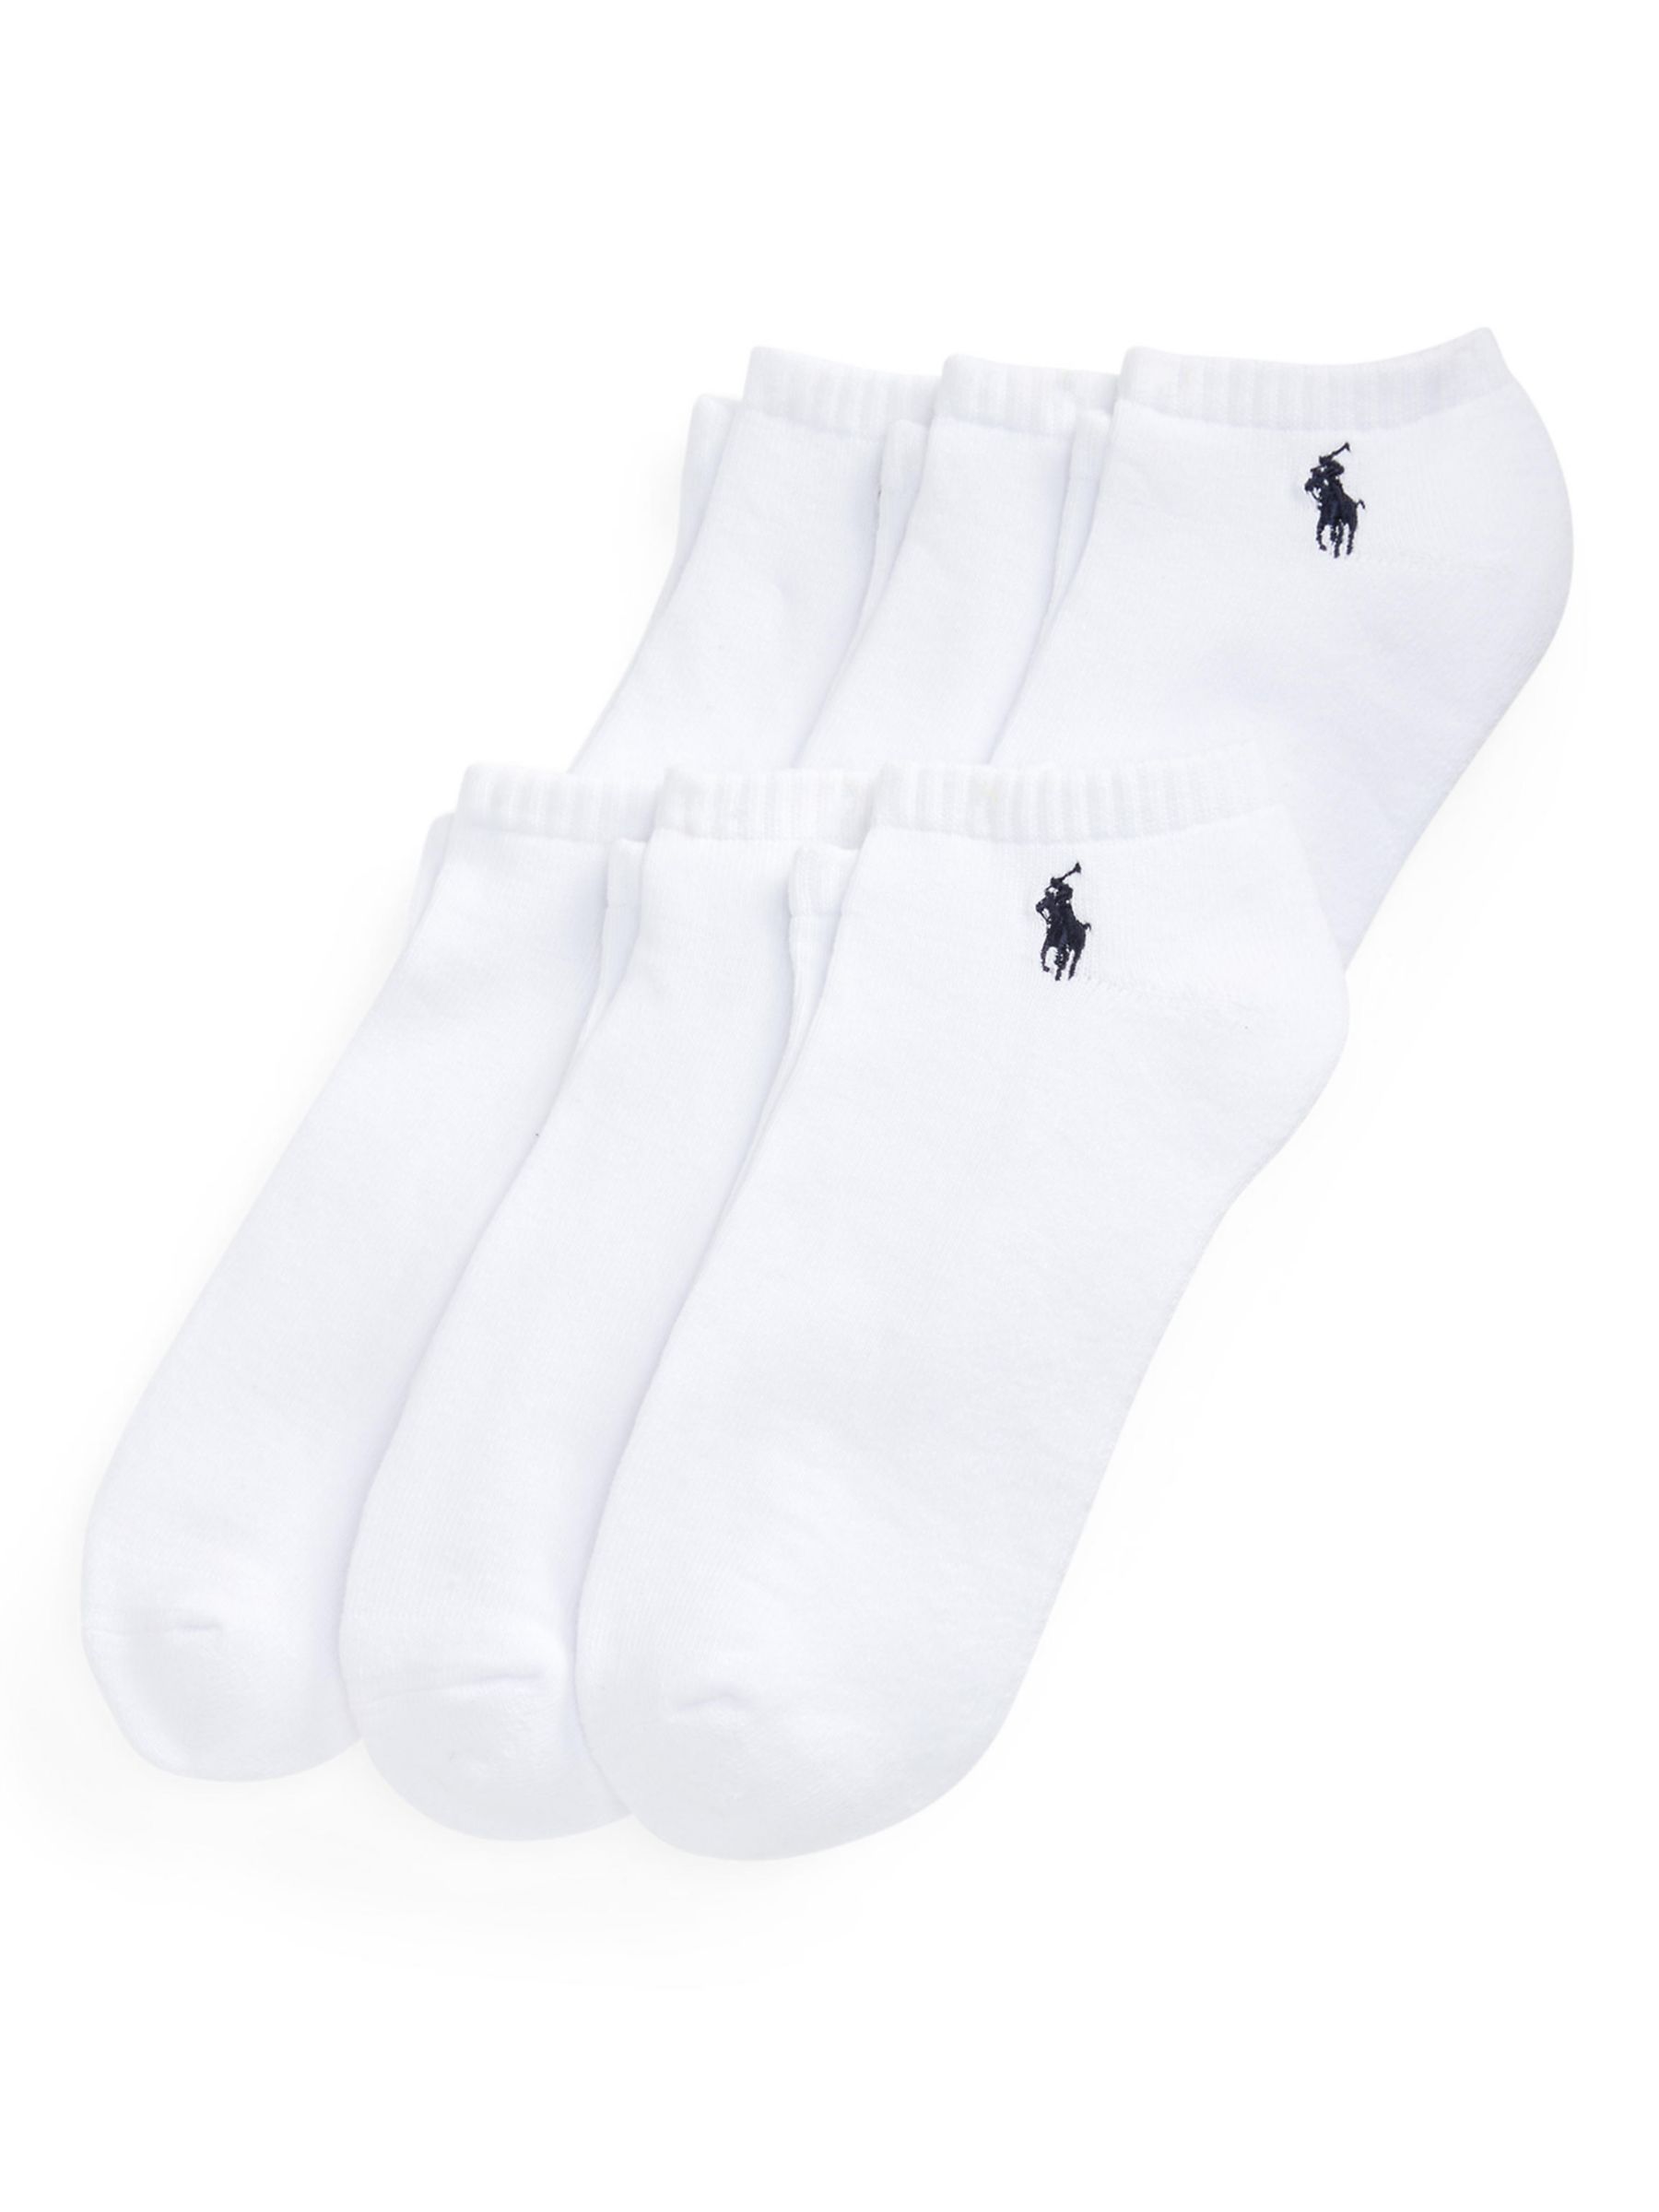 Buy Polo Ralph Lauren Cotton Blend Trainer Socks, One Size, Pack of 6, White Online at johnlewis.com